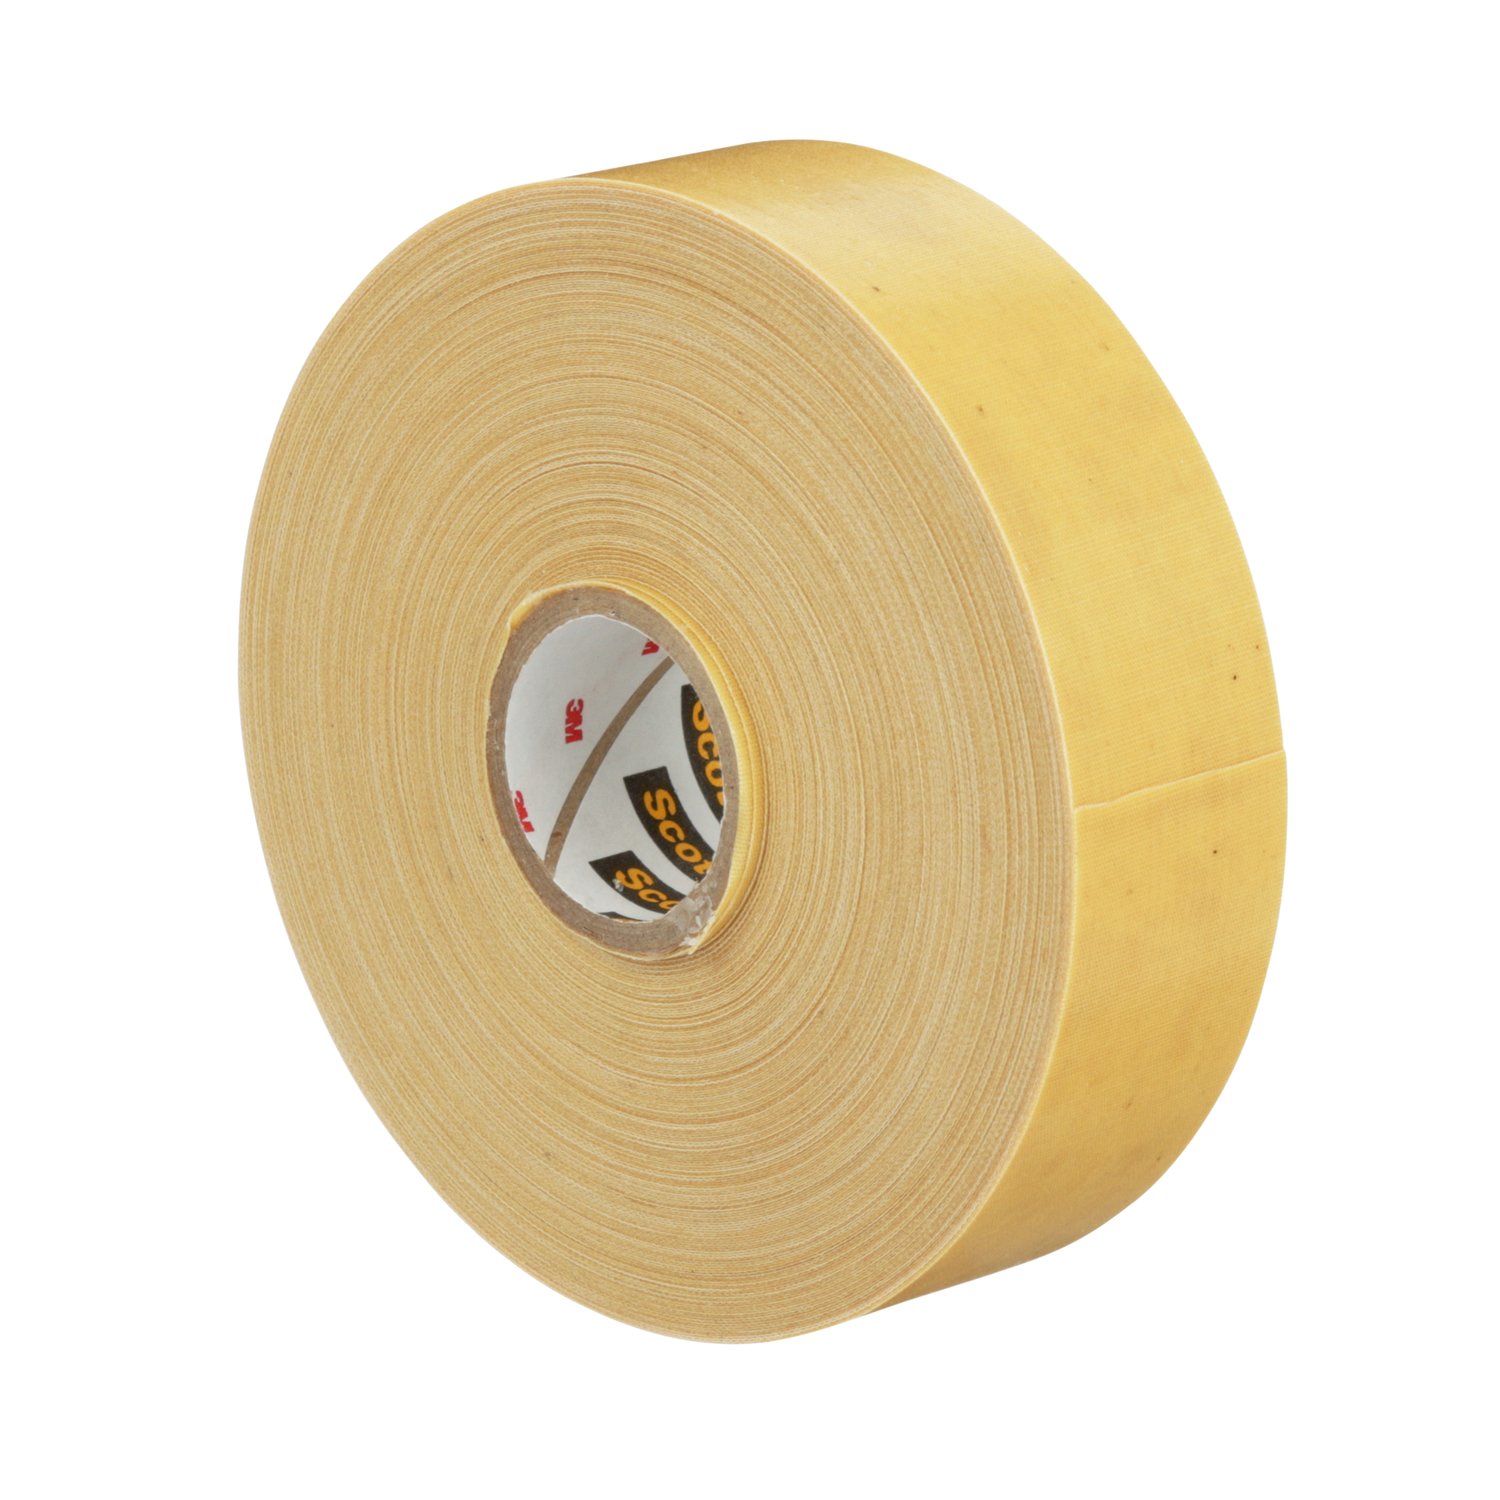 7000132815 - Scotch Varnished Cambric Tape 2520, 3/4 in x 36 yd, Yellow, 48
rolls/Case